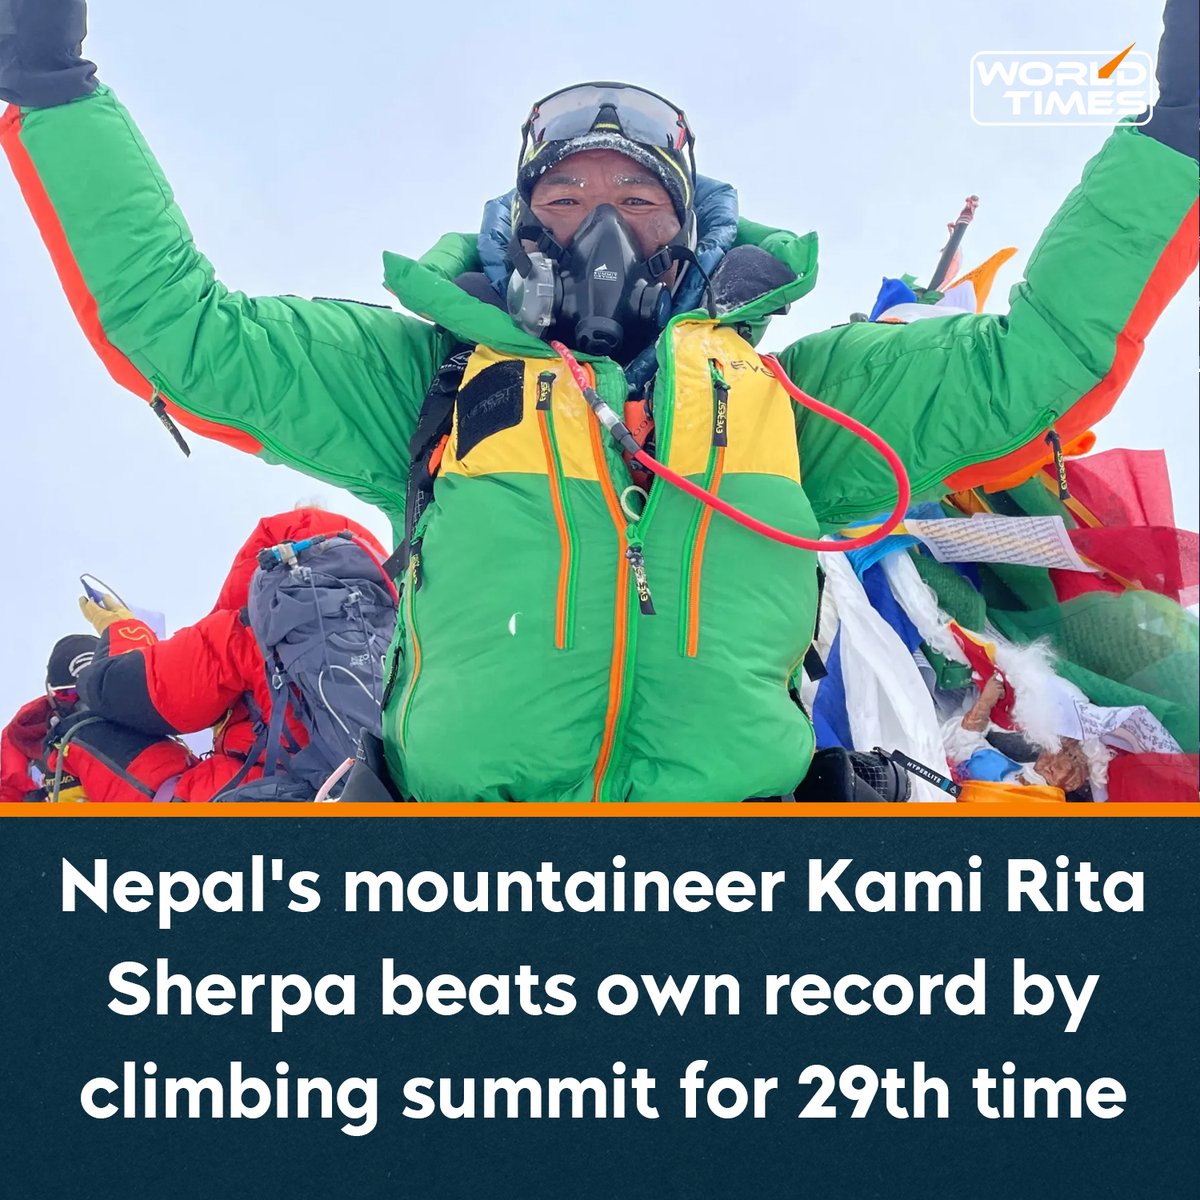 One of the world’s most skilled climbing guides on Mount Everest has reached the Earth’s highest peak for the 29th time, beating his own record for most times to the summit, according to expedition organisers. Kami Rita reached the 8,849-meter (29,032-foot) peak early morning on…